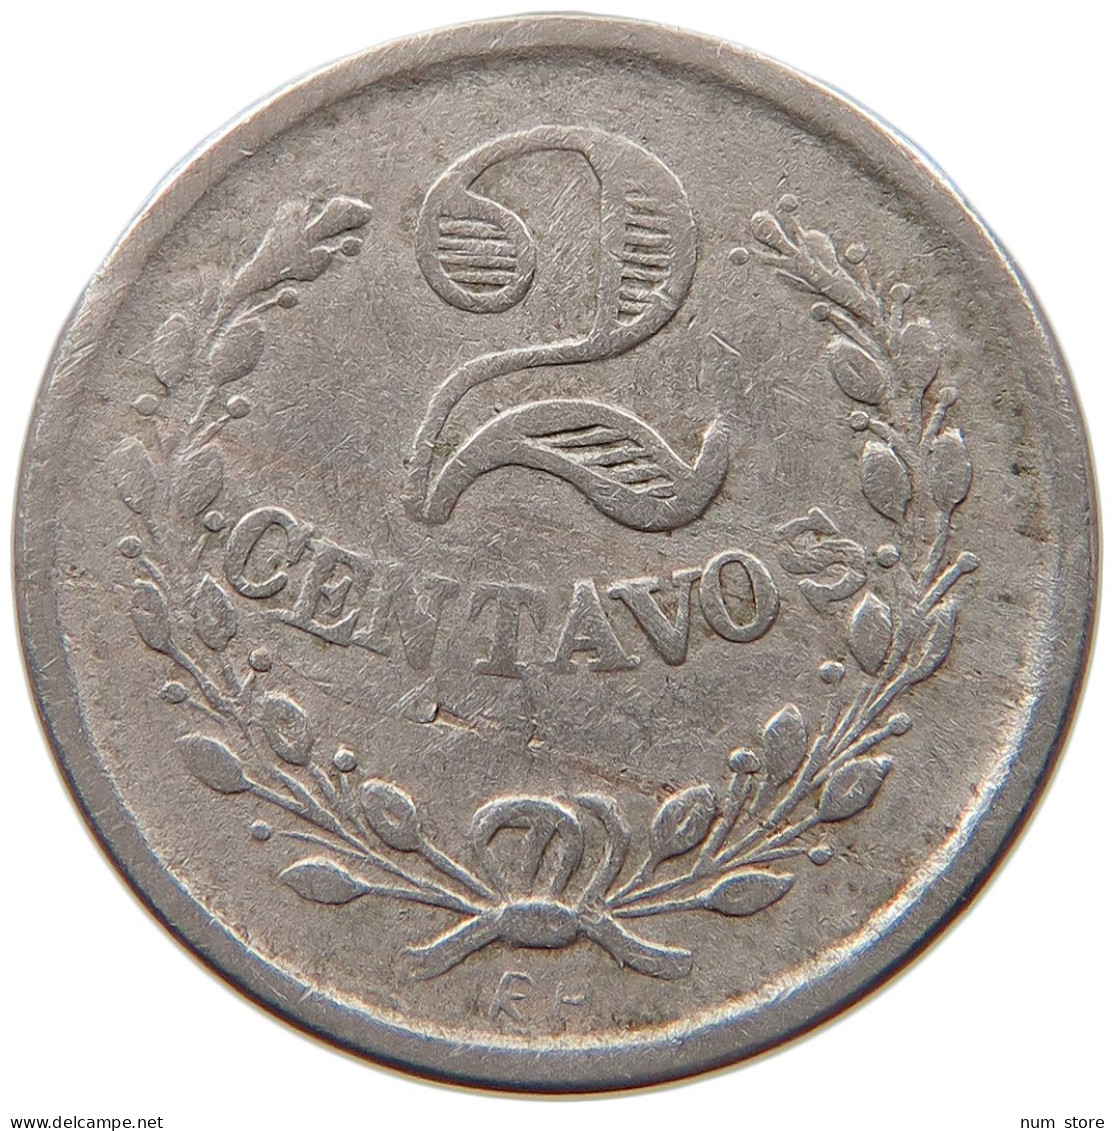 COLOMBIA 2 CENTAVOS 1921  #MA 067214 - Colombia